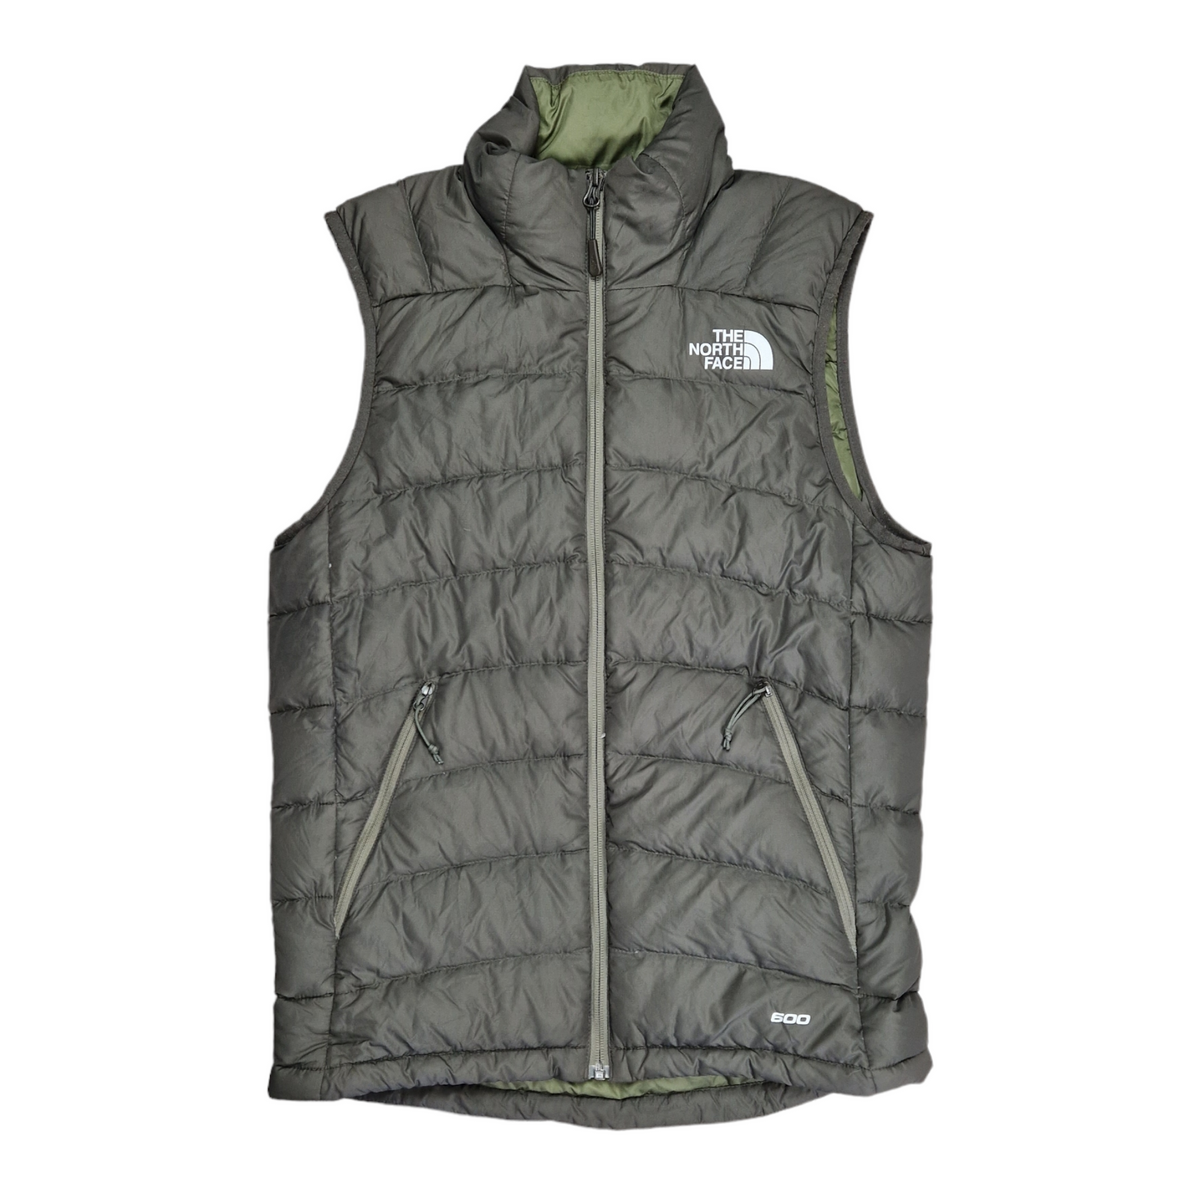 The North Face Hyvent 600 Gilet Puffer Jacket - Size XS